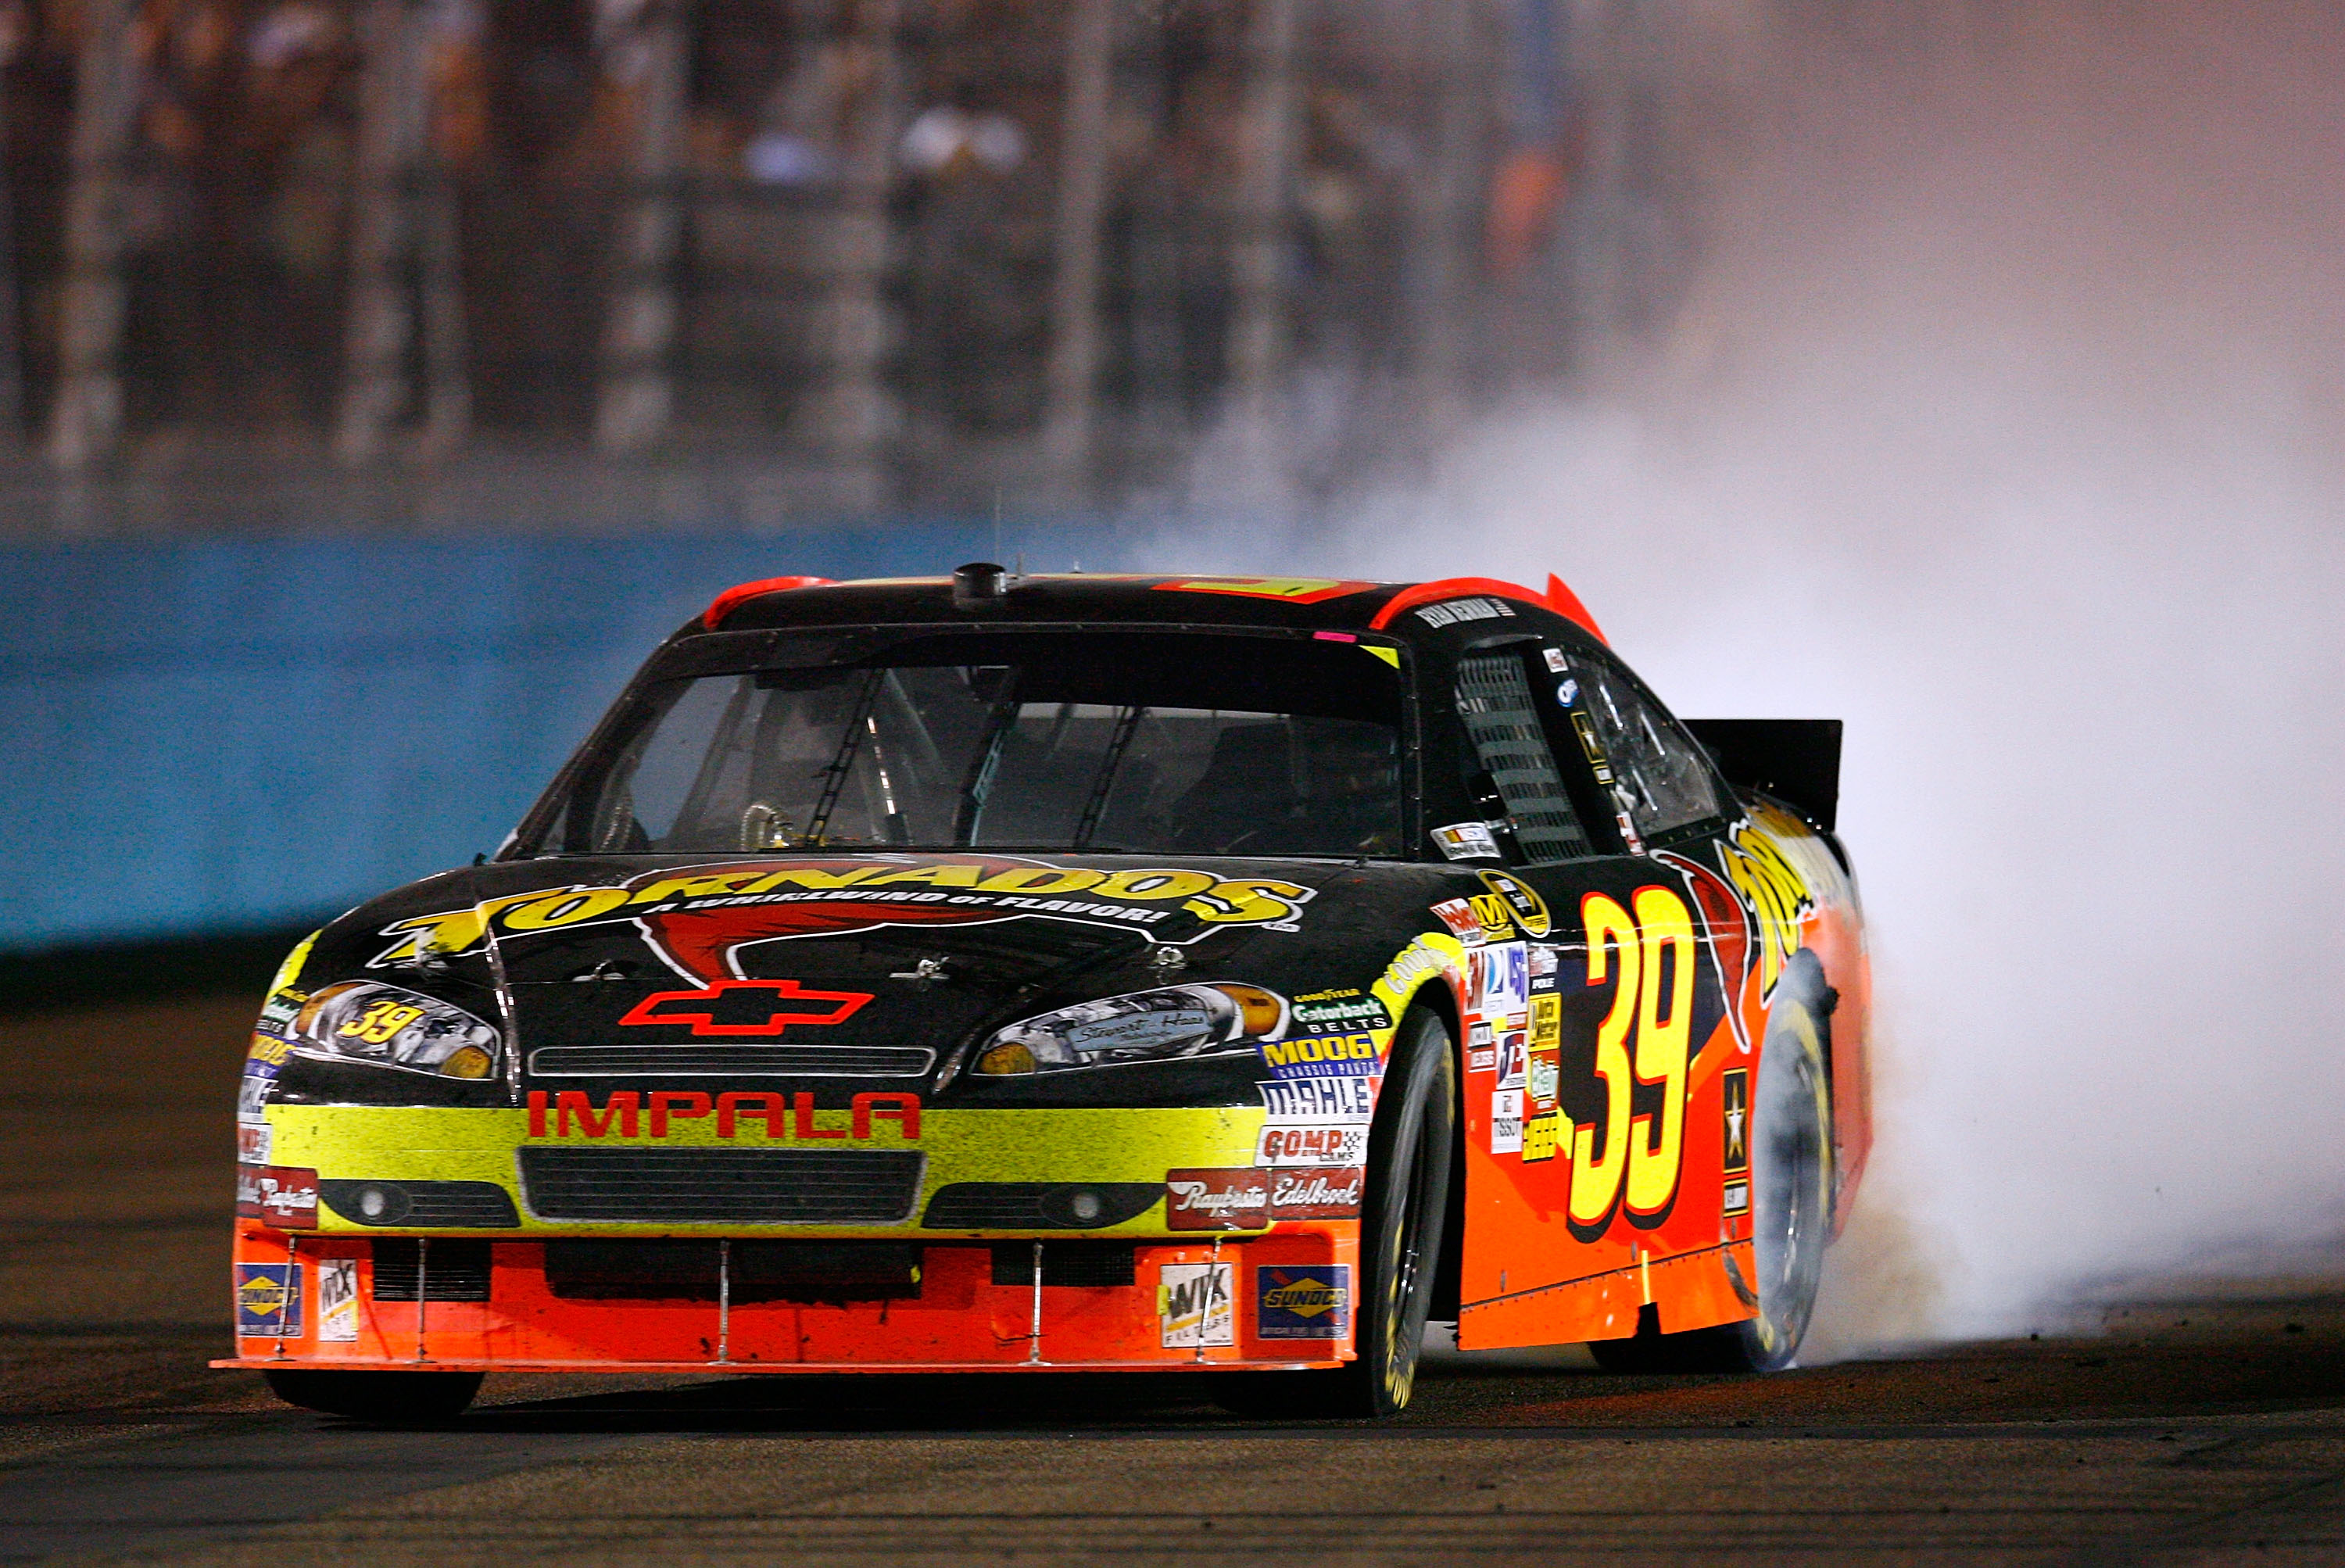 Newman won at Phoenix in 2010, a race three other drivers dominated.